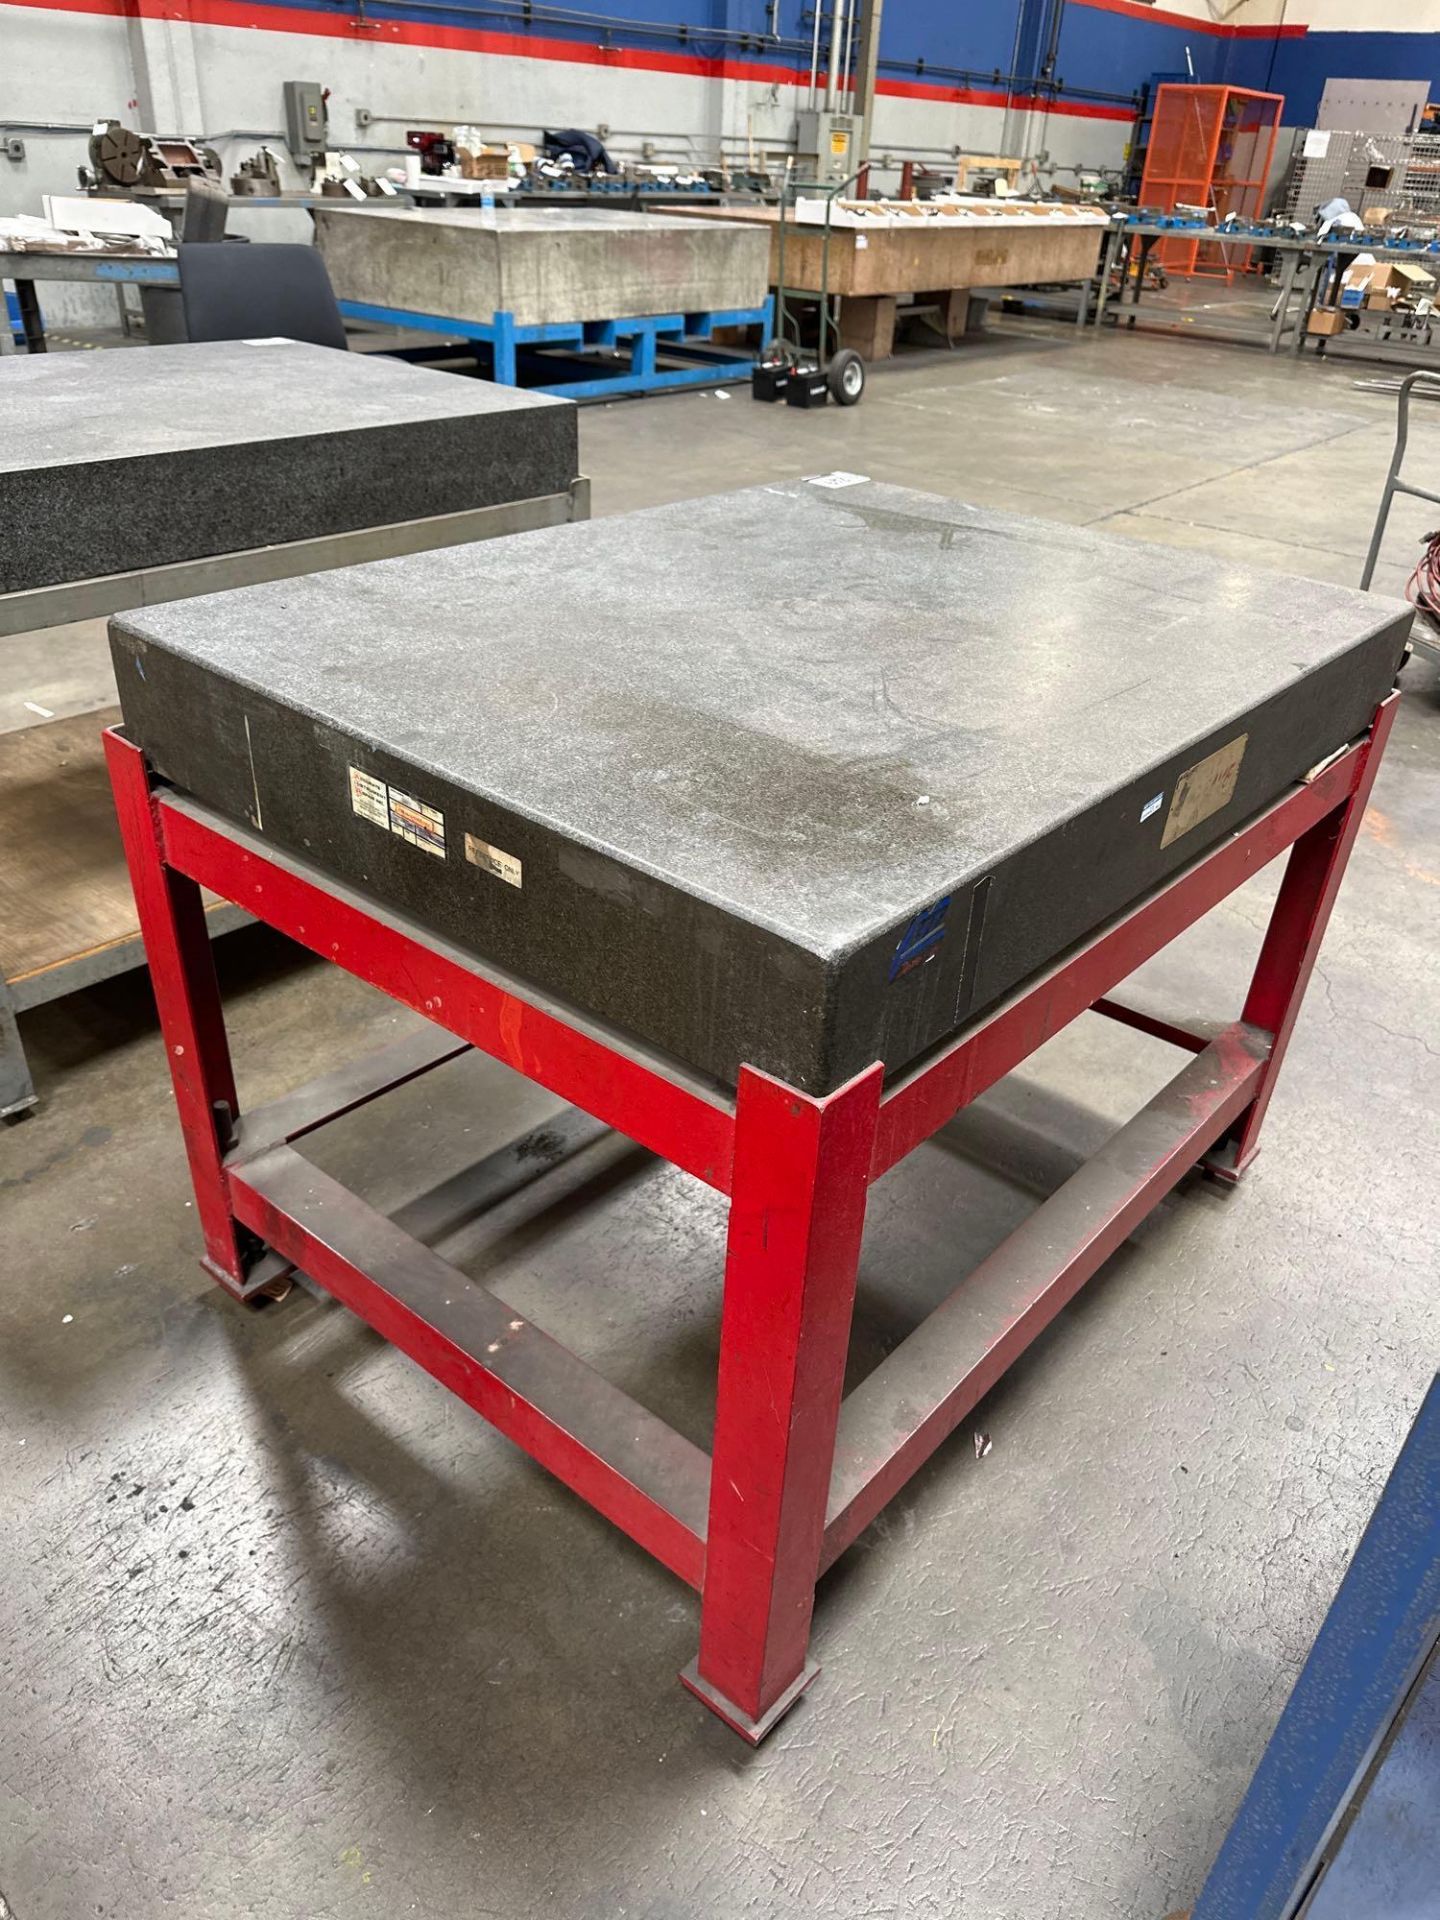 6” x 36” x 48” Granite Surface Plate w/ Steel Stand - Image 3 of 4